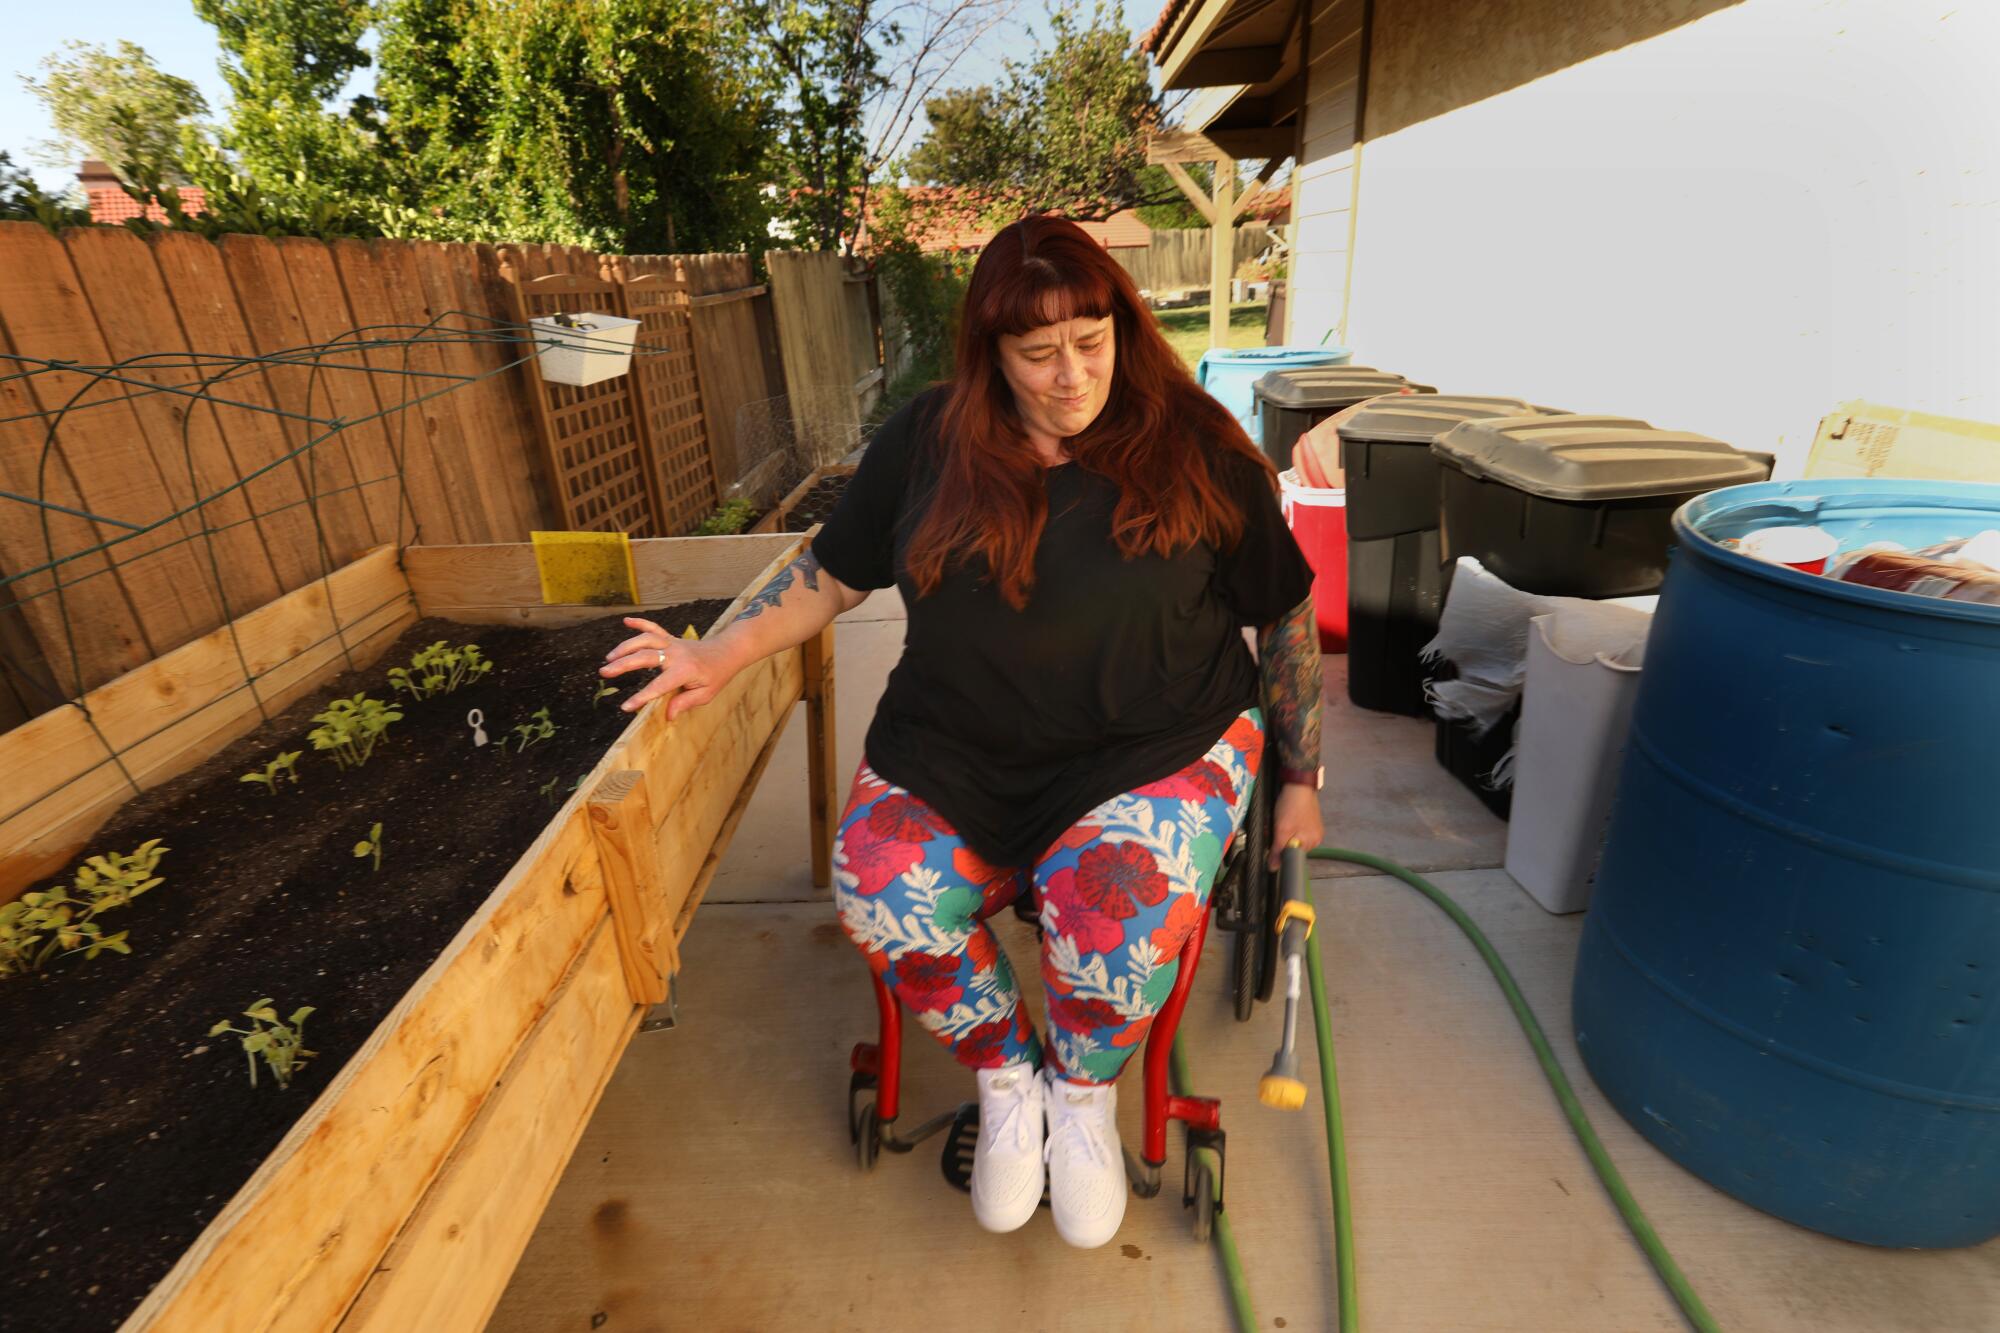 A woman in a wheelchair tugs at a garden hose in a home's side yard